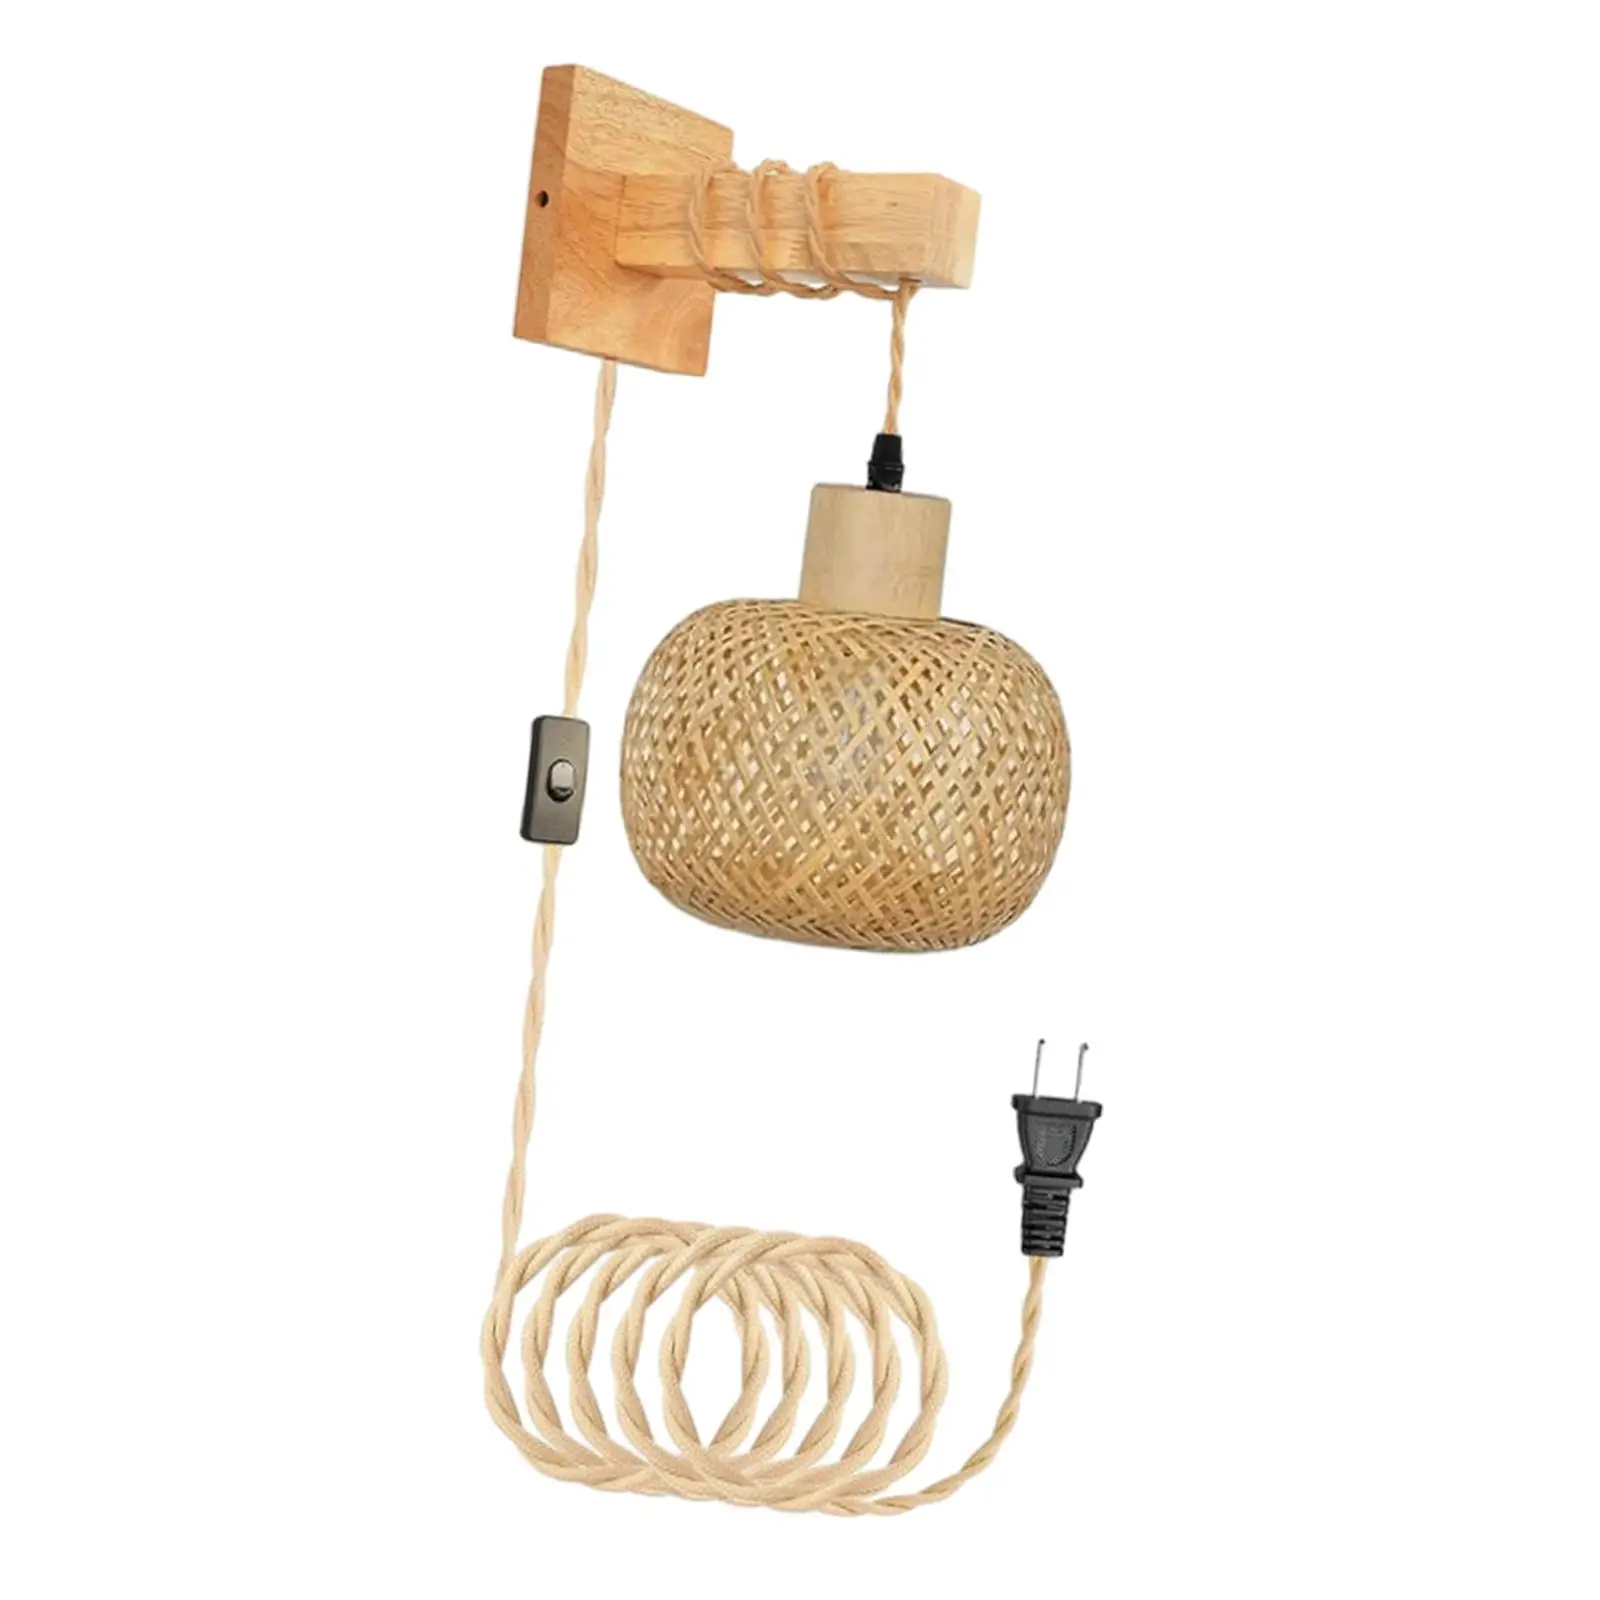 Bamboo Wall Sconce Hand Woven Rustic Plug in Pendant Light Farmhouse Hanging Lamp for Reading Bedroom Home Bathroom Kitchen